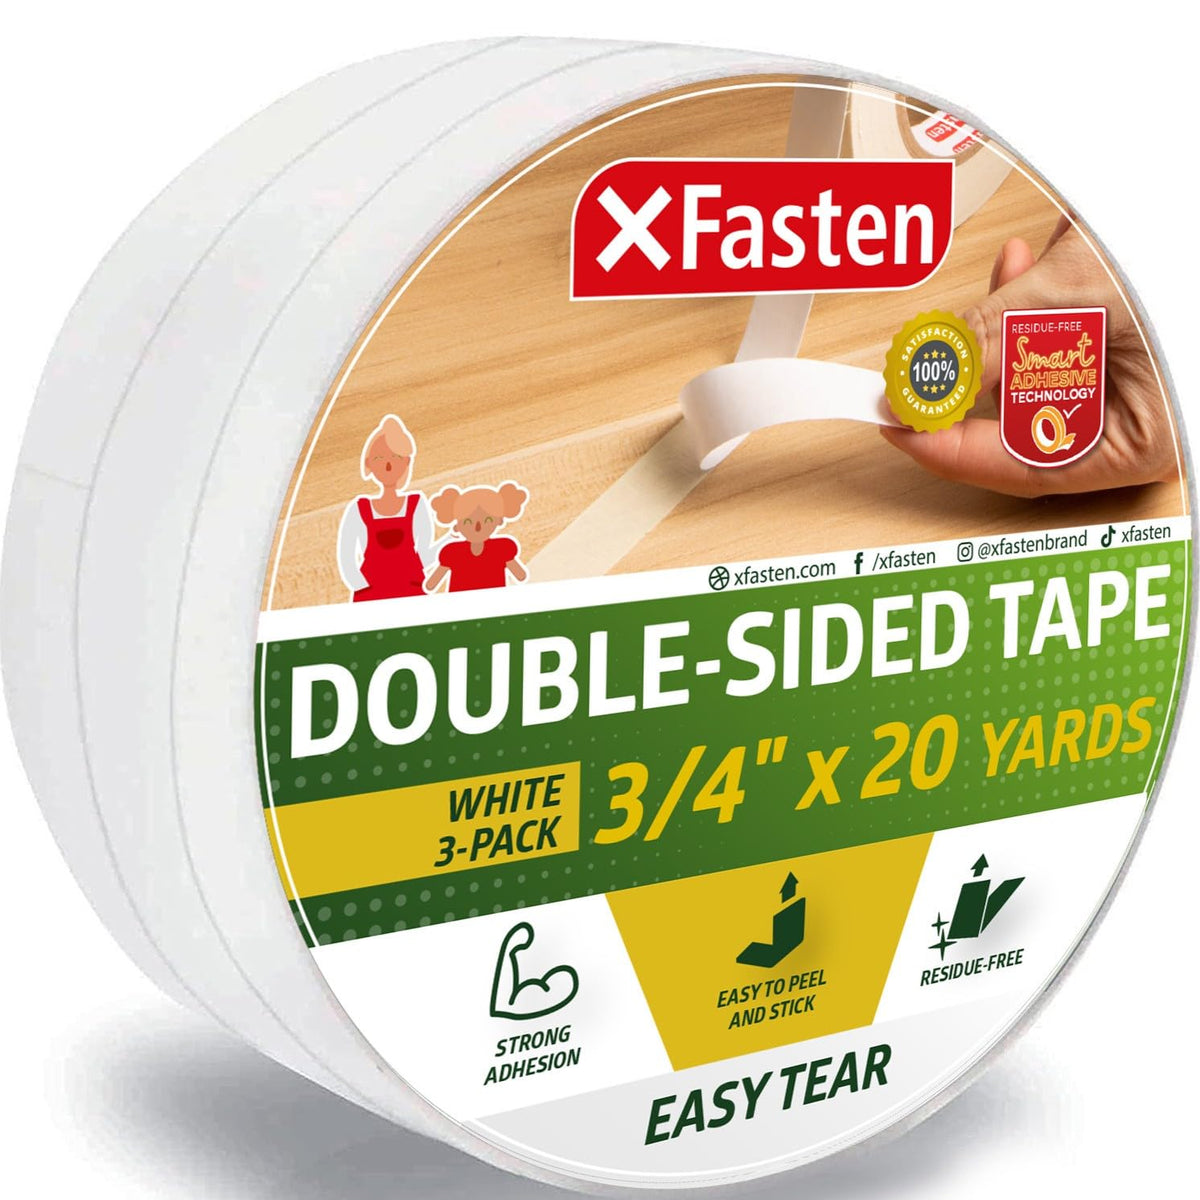 XFasten Double Sided Carpet Tape 2-Inch x 30 Yards